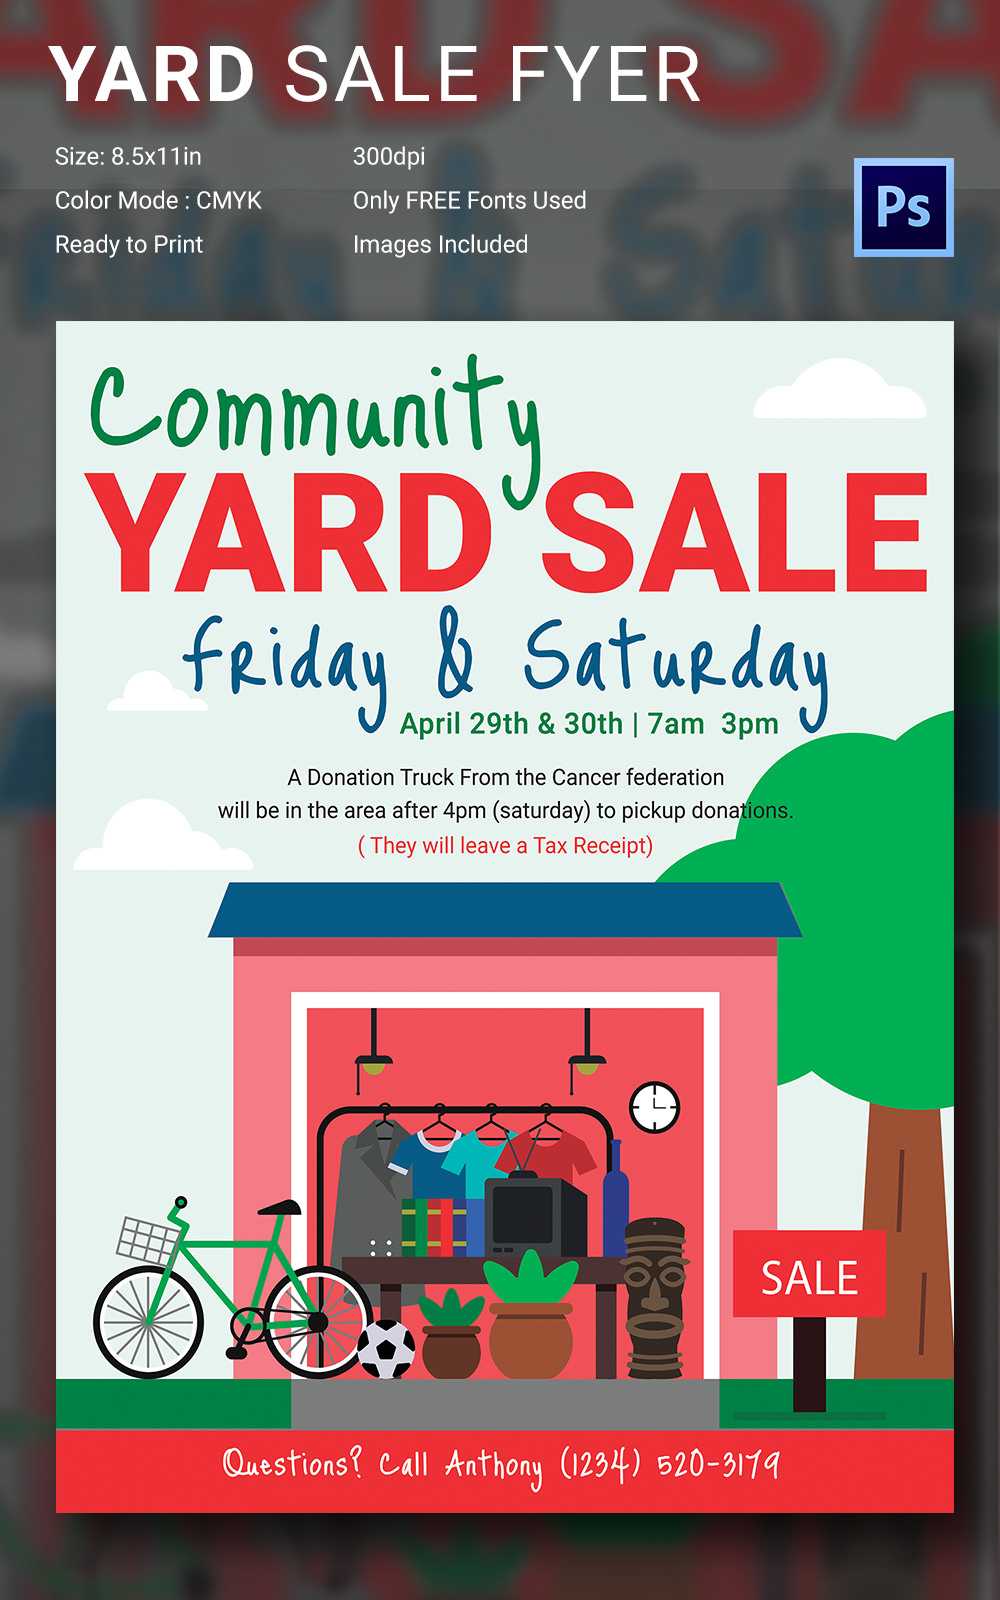 005 Yard Sale Flyer Template Free Ideas 75828 Stupendous With Regard To Garage Sale Flyer Template Word